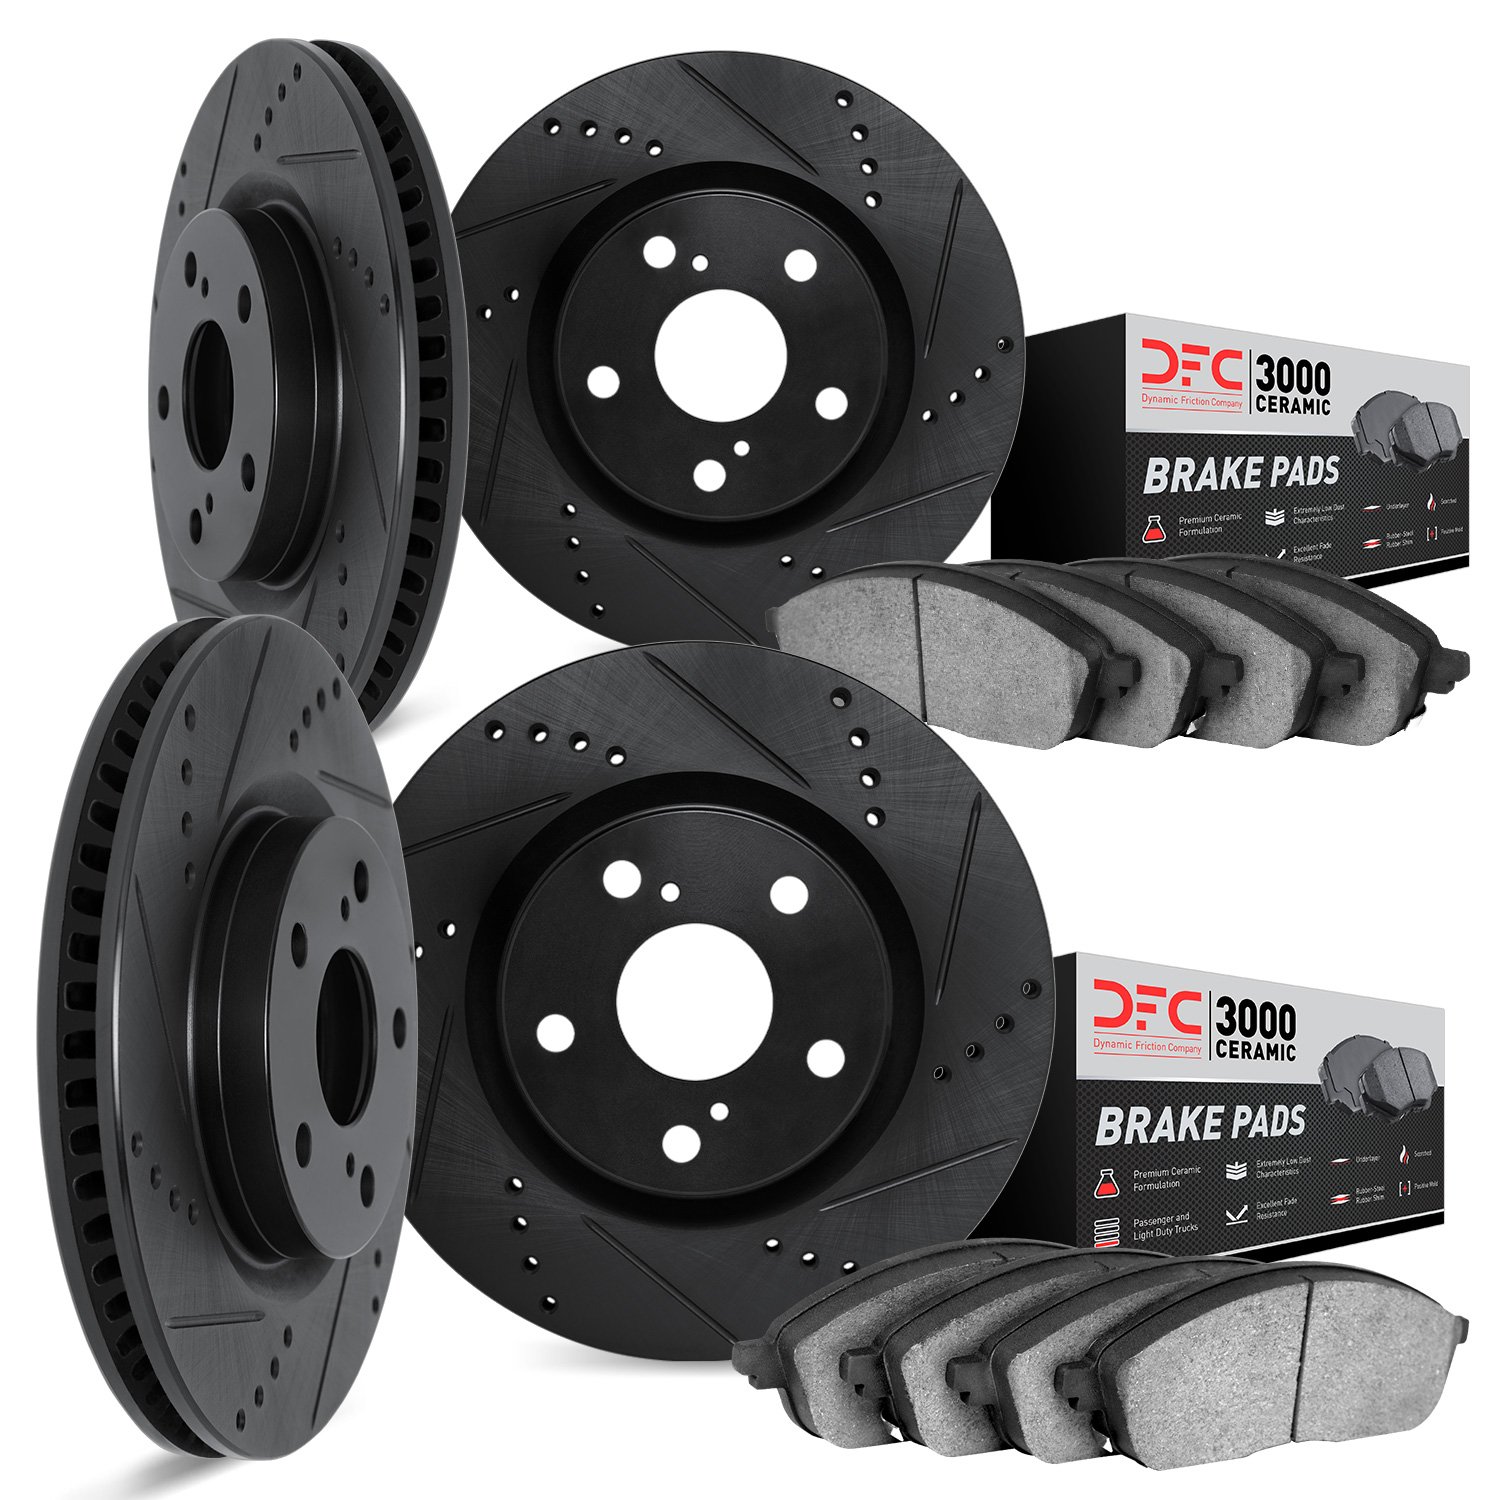 8304-47007 Drilled/Slotted Brake Rotors with 3000-Series Ceramic Brake Pads Kit [Black], 1979-1980 GM, Position: Front and Rear